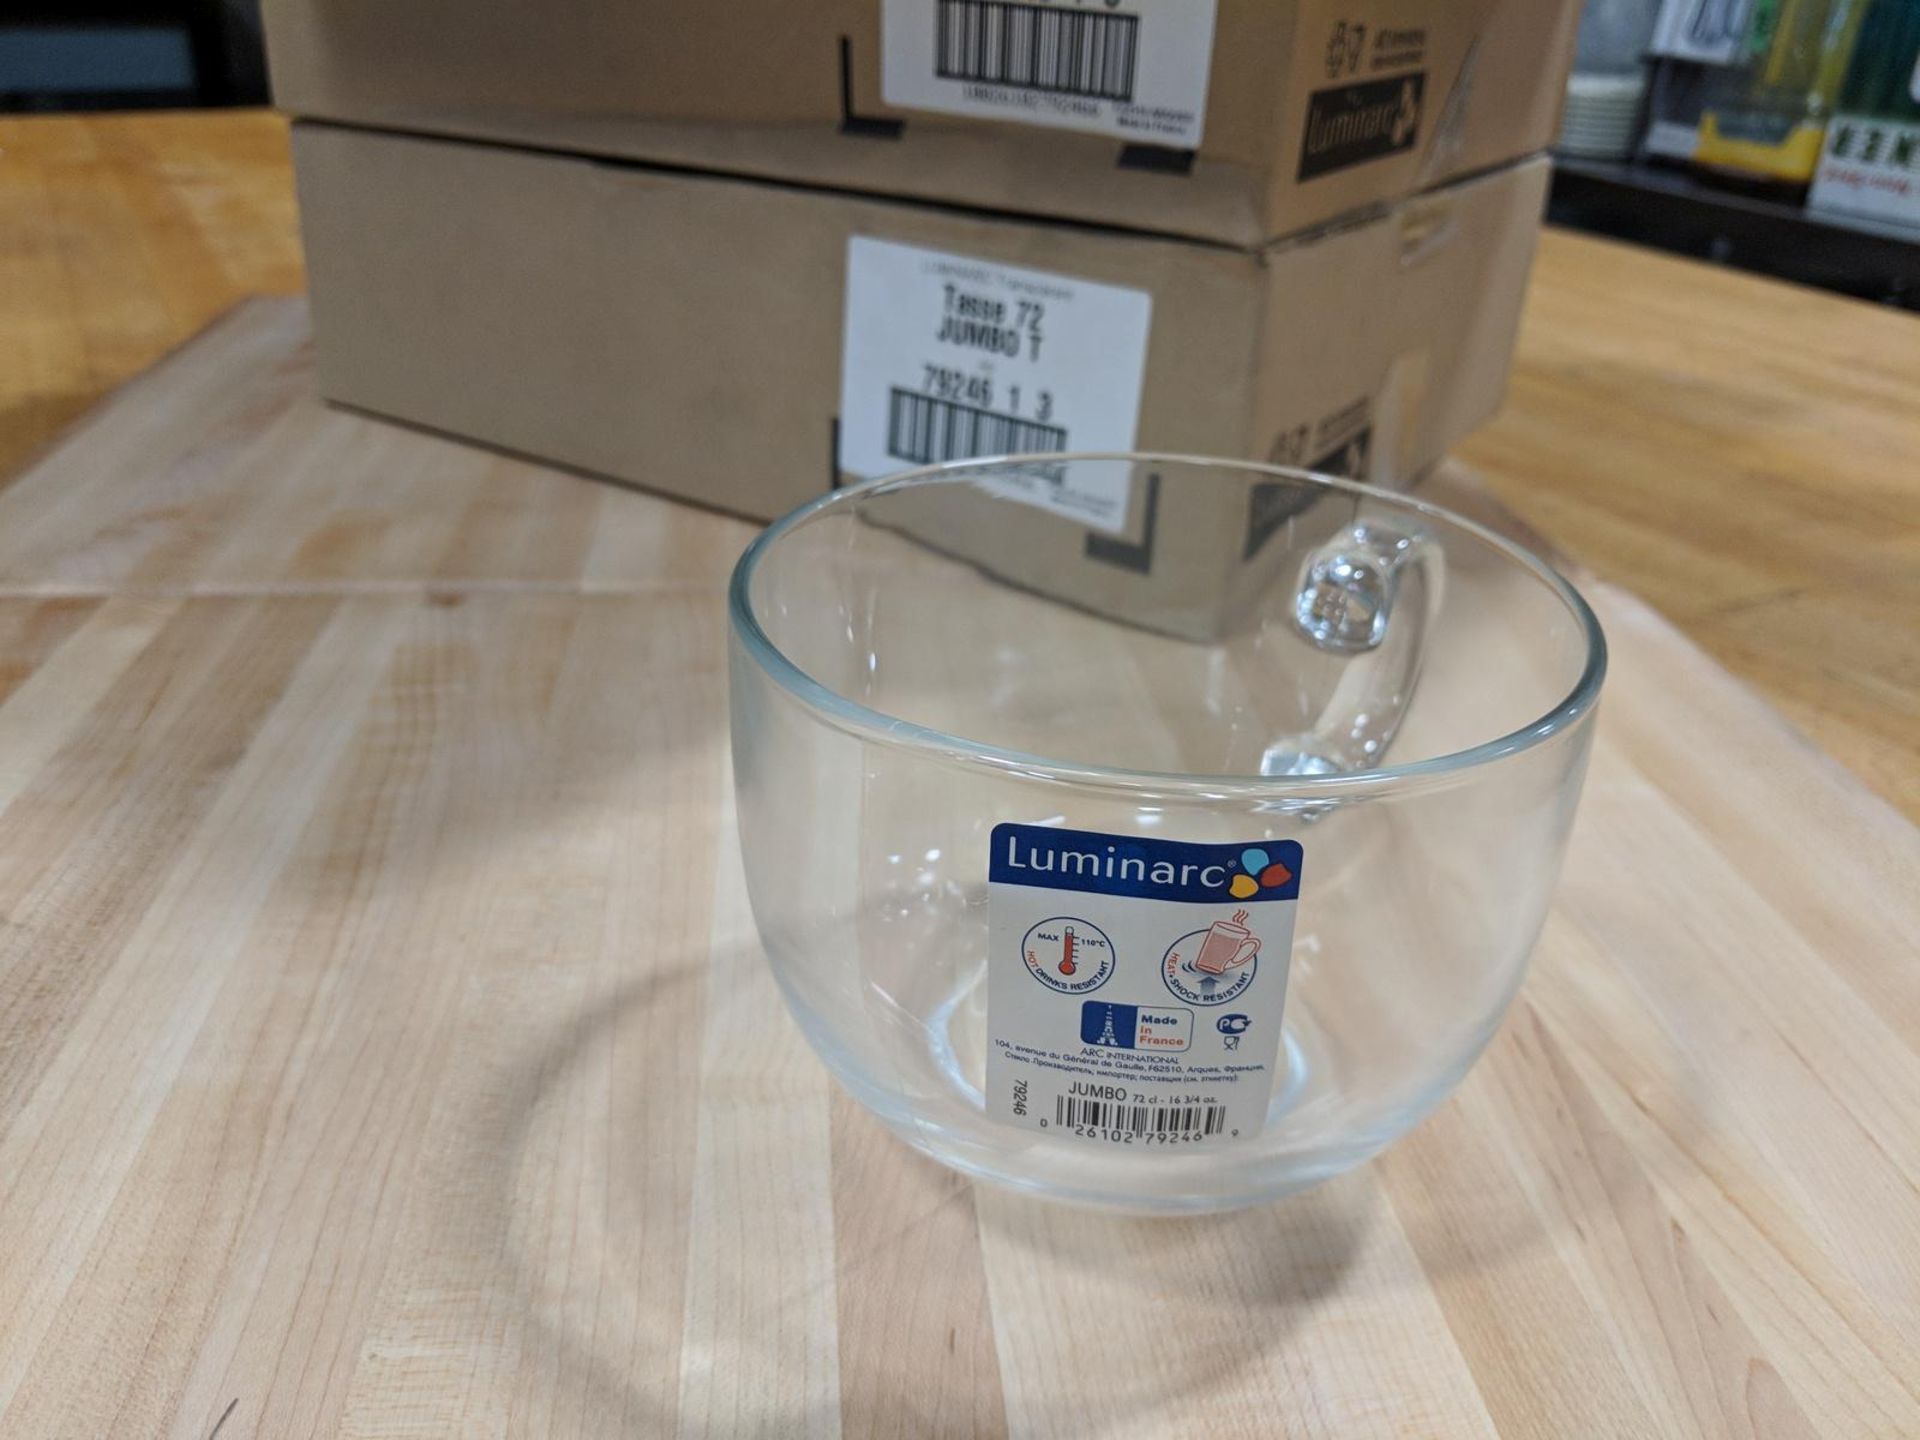 17oz/500ml Clear Glass Mugs - Lot of 12 (2 Cases), Luminarc 79246 - Image 2 of 2